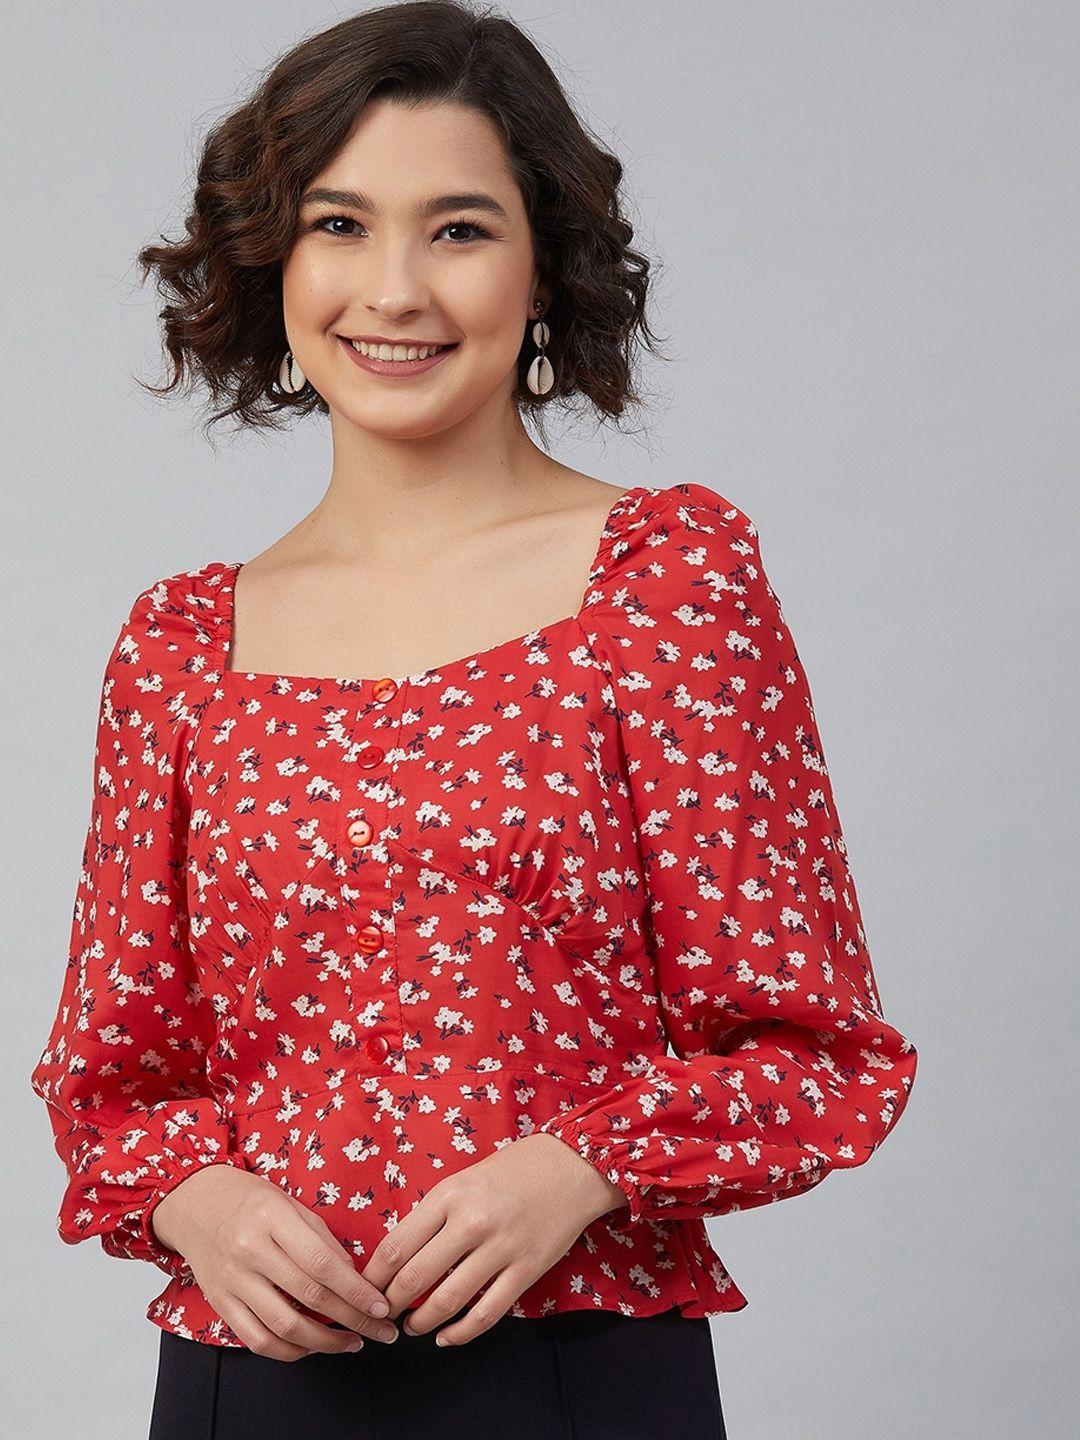 marie claire women red floral printed puff sleeves cinched waist top